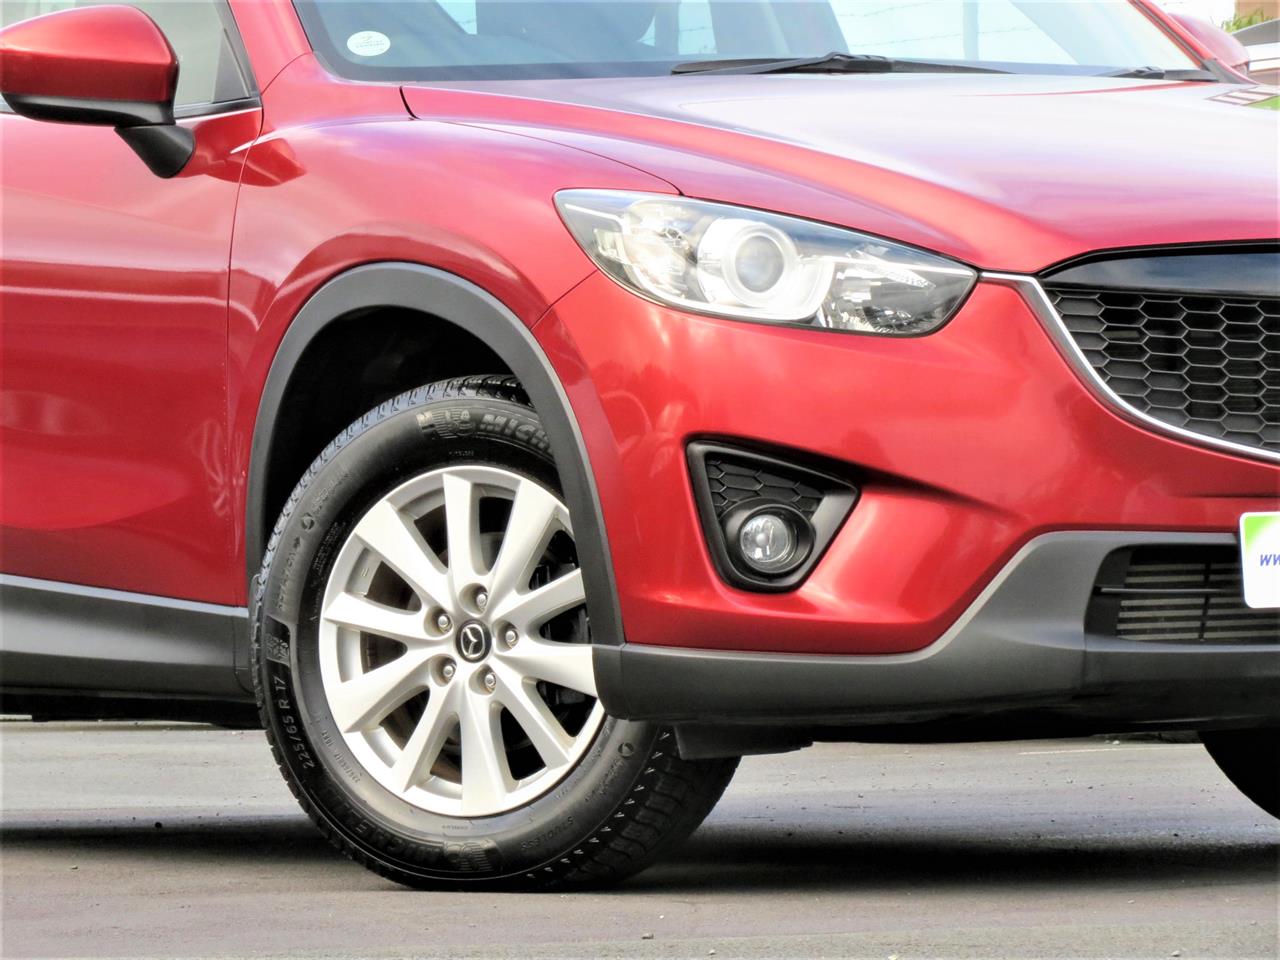 2012 Mazda CX-5 only $64 weekly